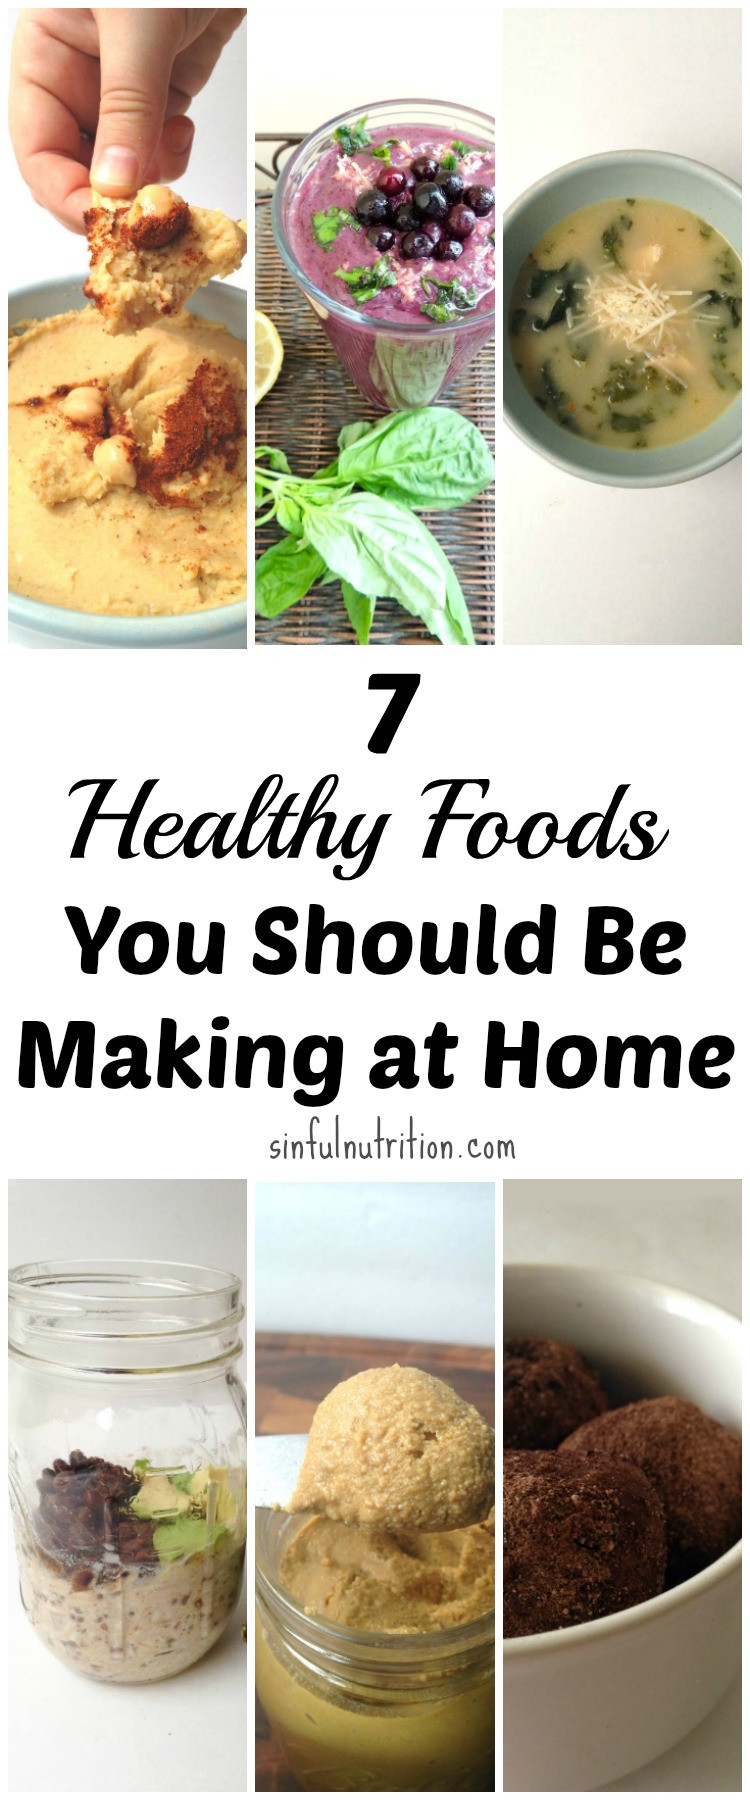 Healthy Snacks To Have At Home
 7 Healthy Foods You Should Be Making At Home Sinful